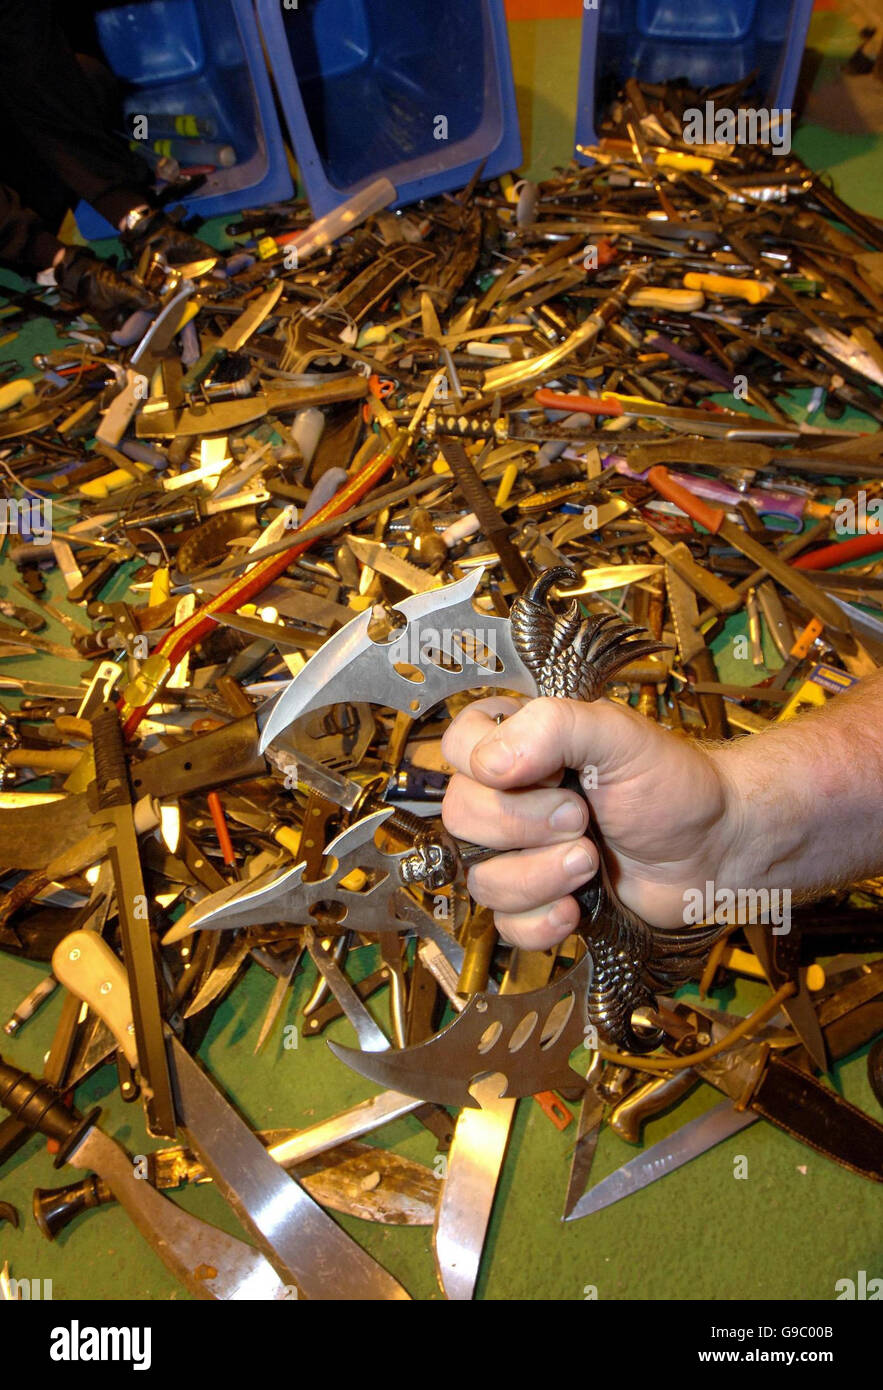 West Midlands Police show some of the 1,600 knives surrendered in the current knife amnesty. PRESS ASSOCIATION photo, Monday 22 May 2006. A total of 1600 knives have been surrendered to West Midlands Police during the current amnesty the haul on display will be melted down as scrap metal. See PA story POLICE Knives. Picture David Jones/PA Stock Photo